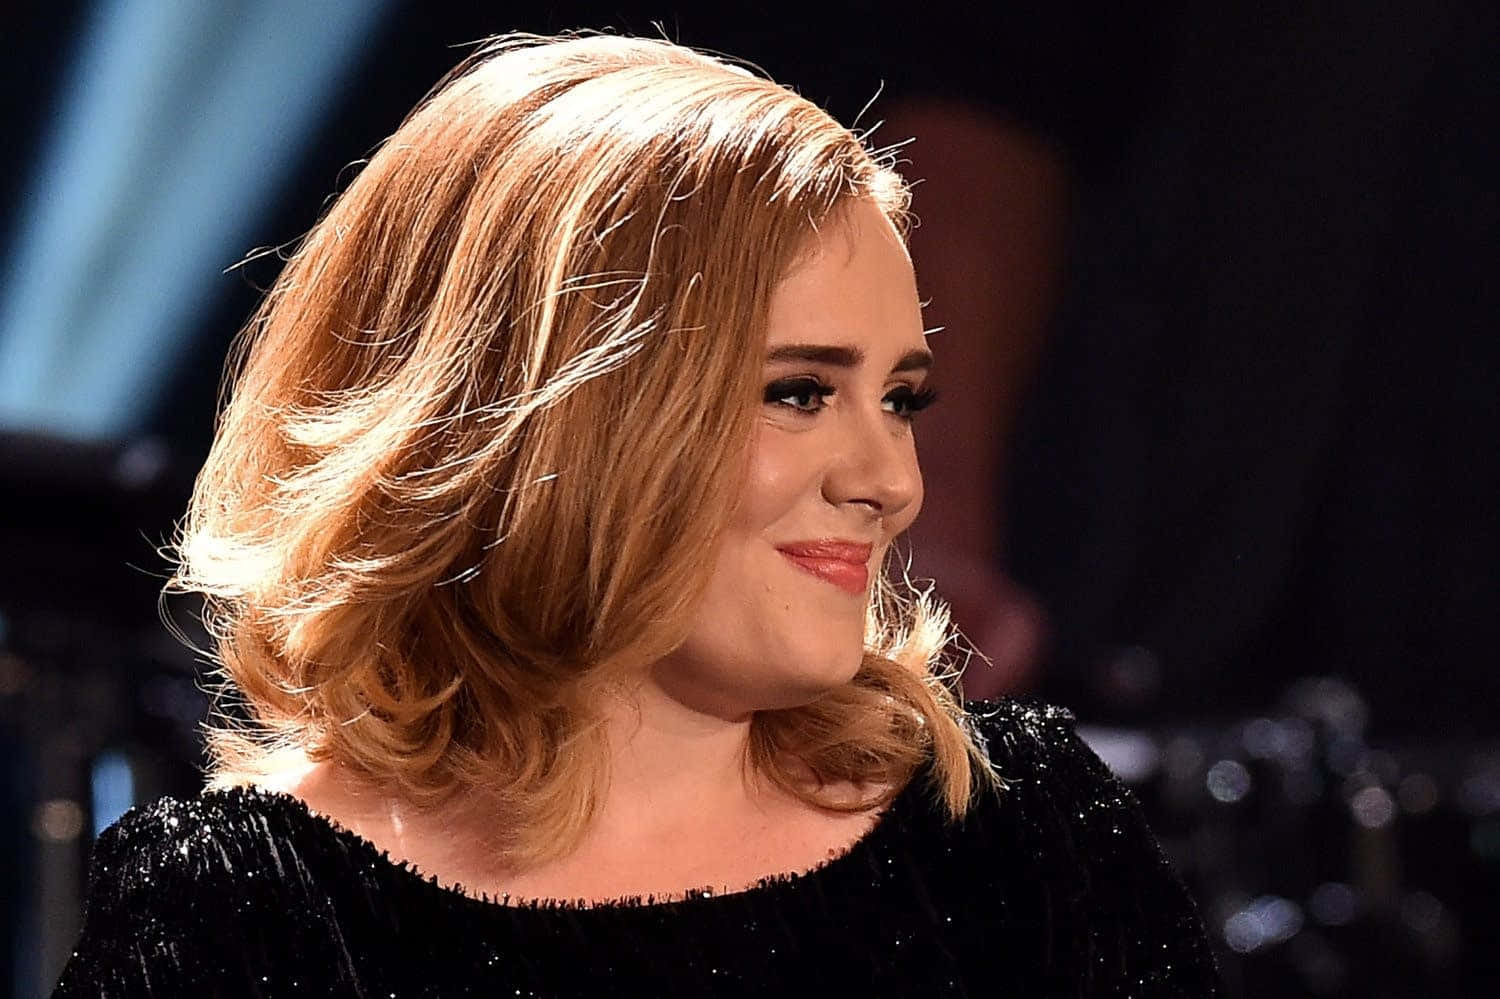 Singer Adele smiles to the camera.